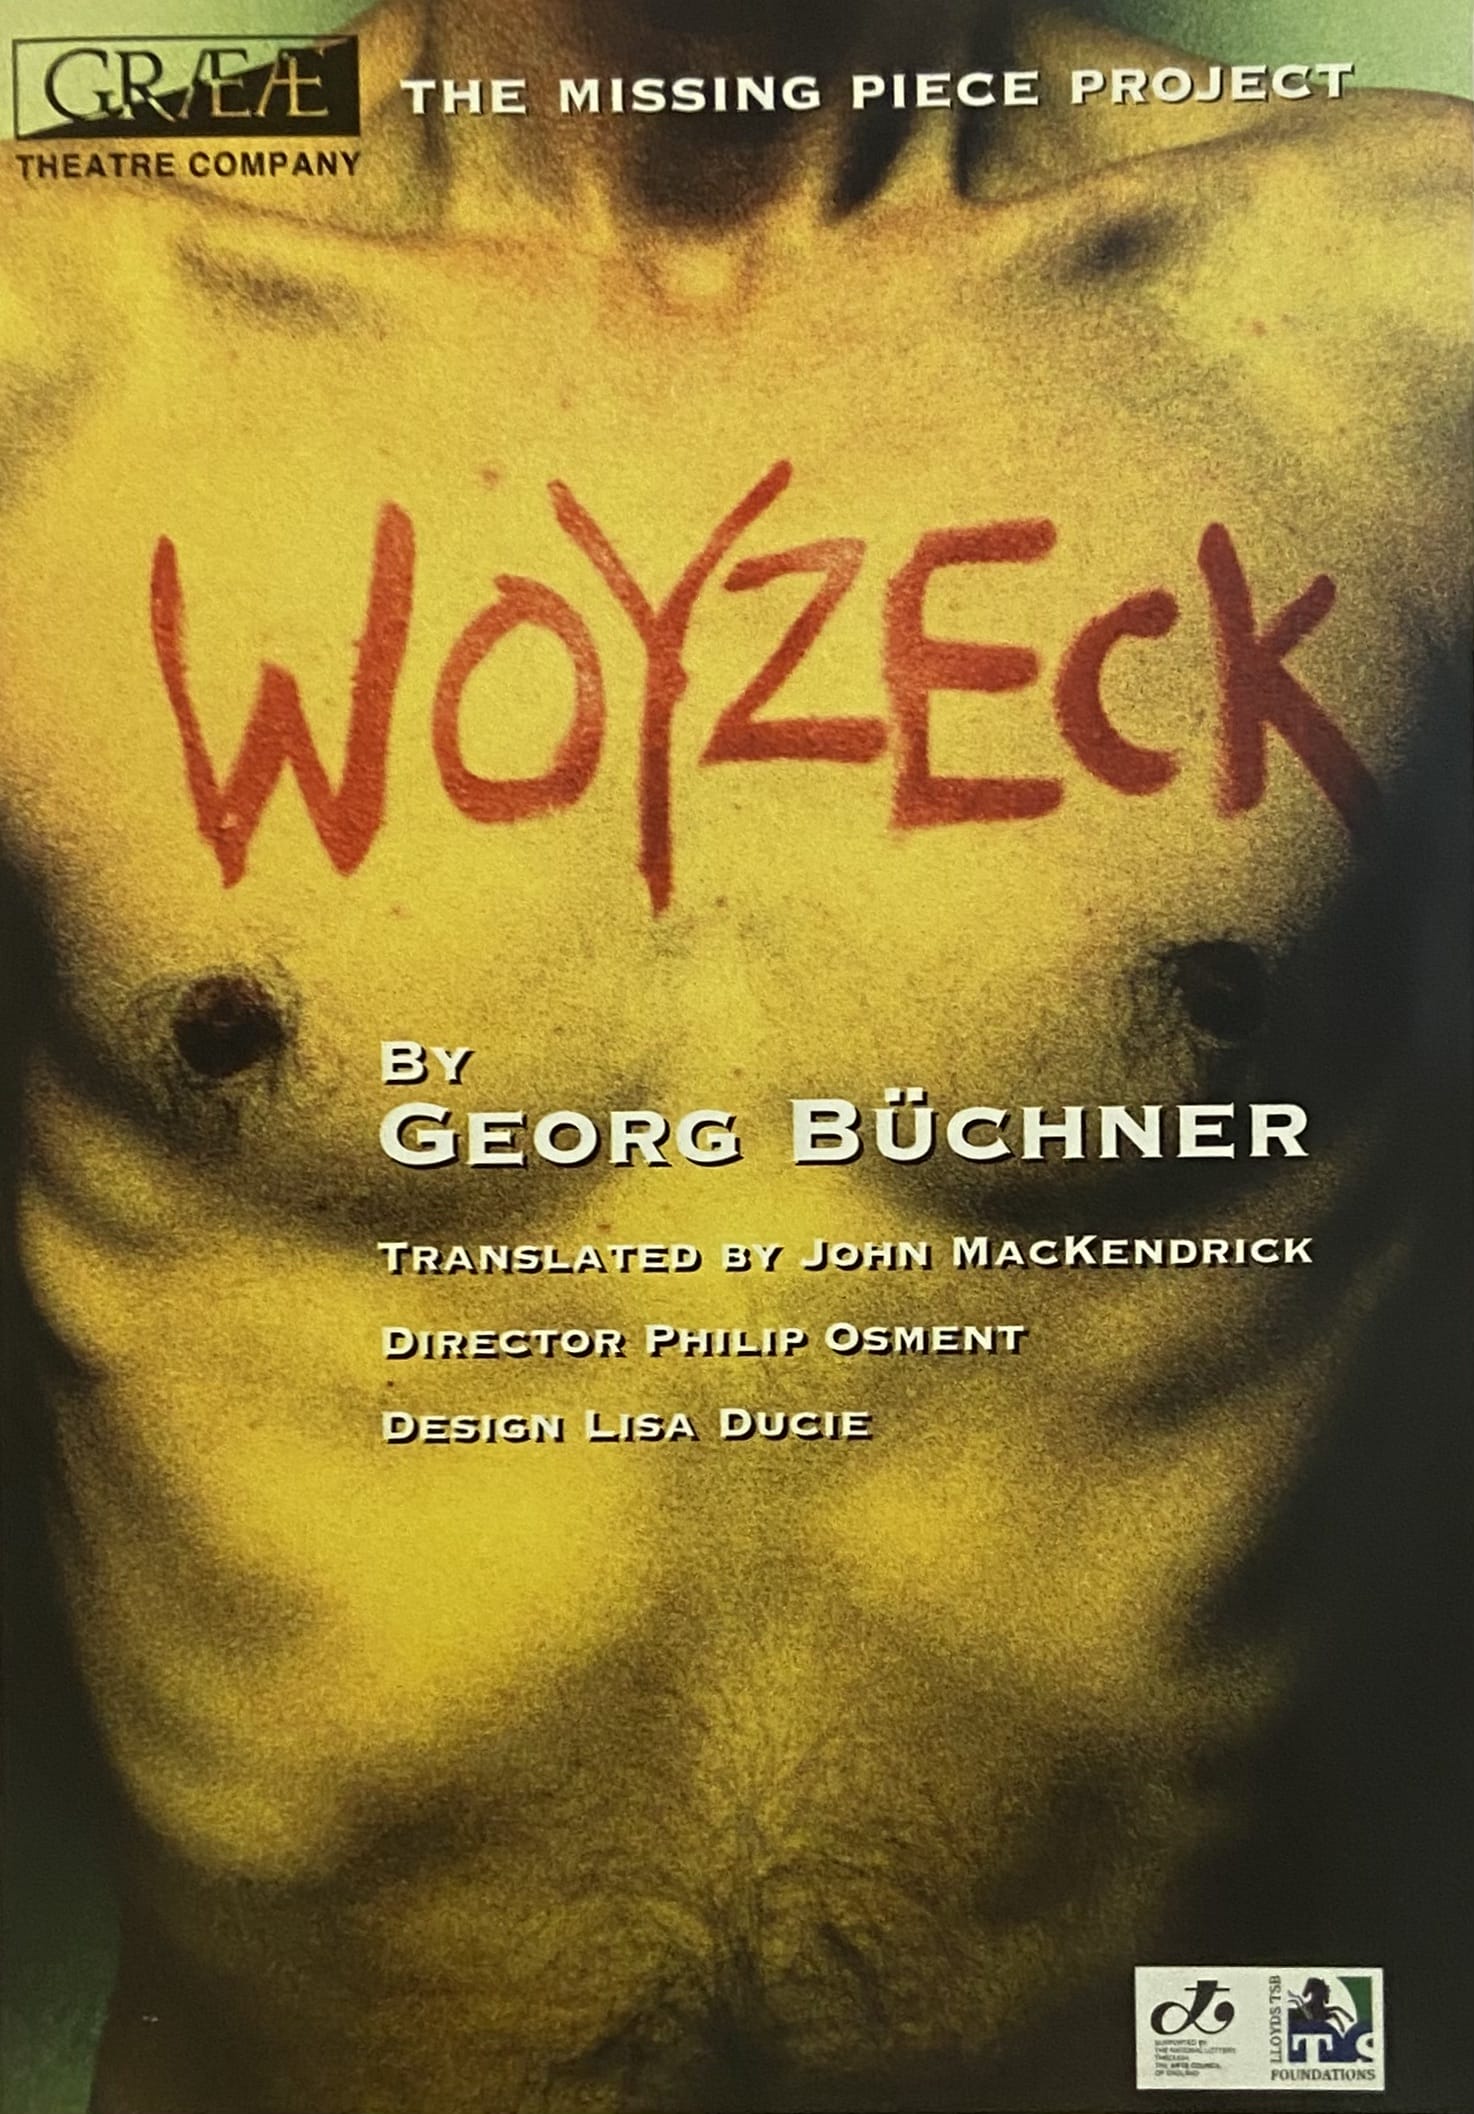 A poster for Graeae's production of 'Woyzeck'. The poster is a picture of a man's bare chest with 